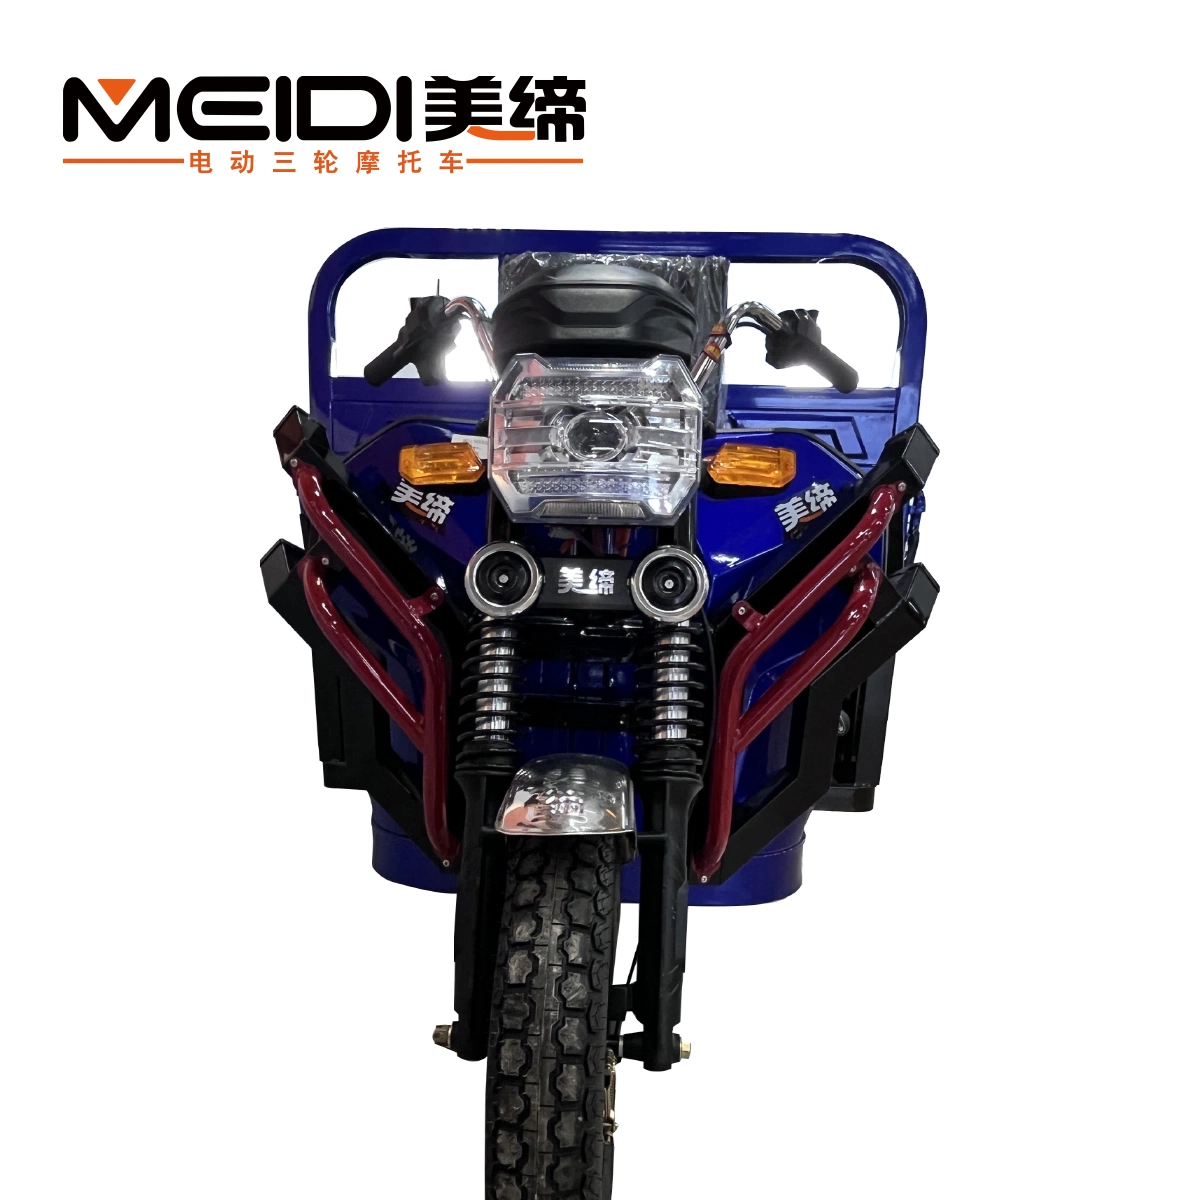 Meidi Reliable Battery Operated Self-Unloading Electric Cargo Tricycles for Transportation